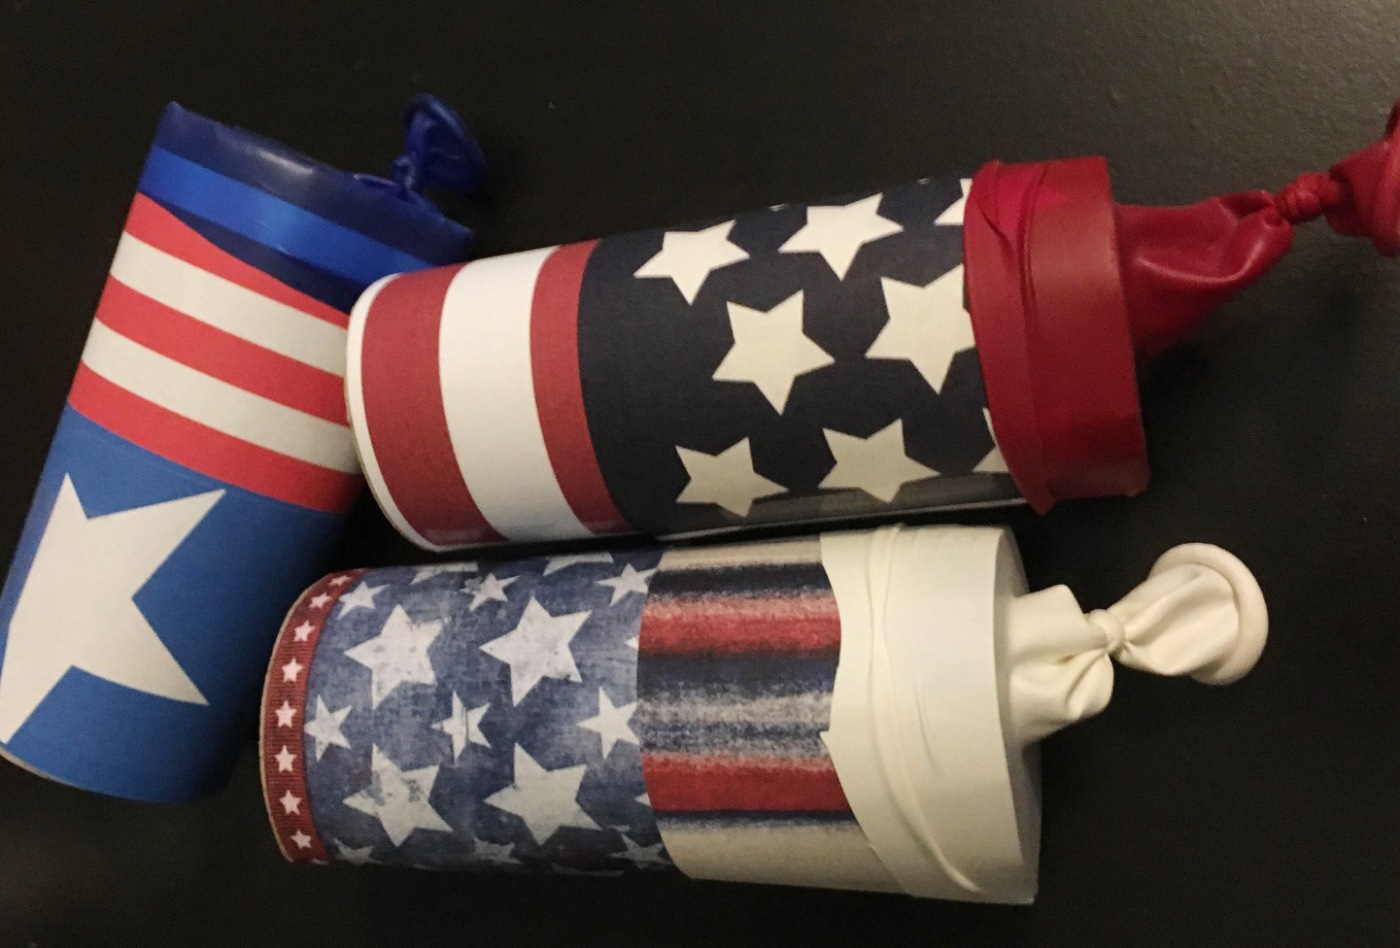 4th of July Confetti Launchers. Kids. Independence Day. Crafts. Family. Children. Summer. Cheap.